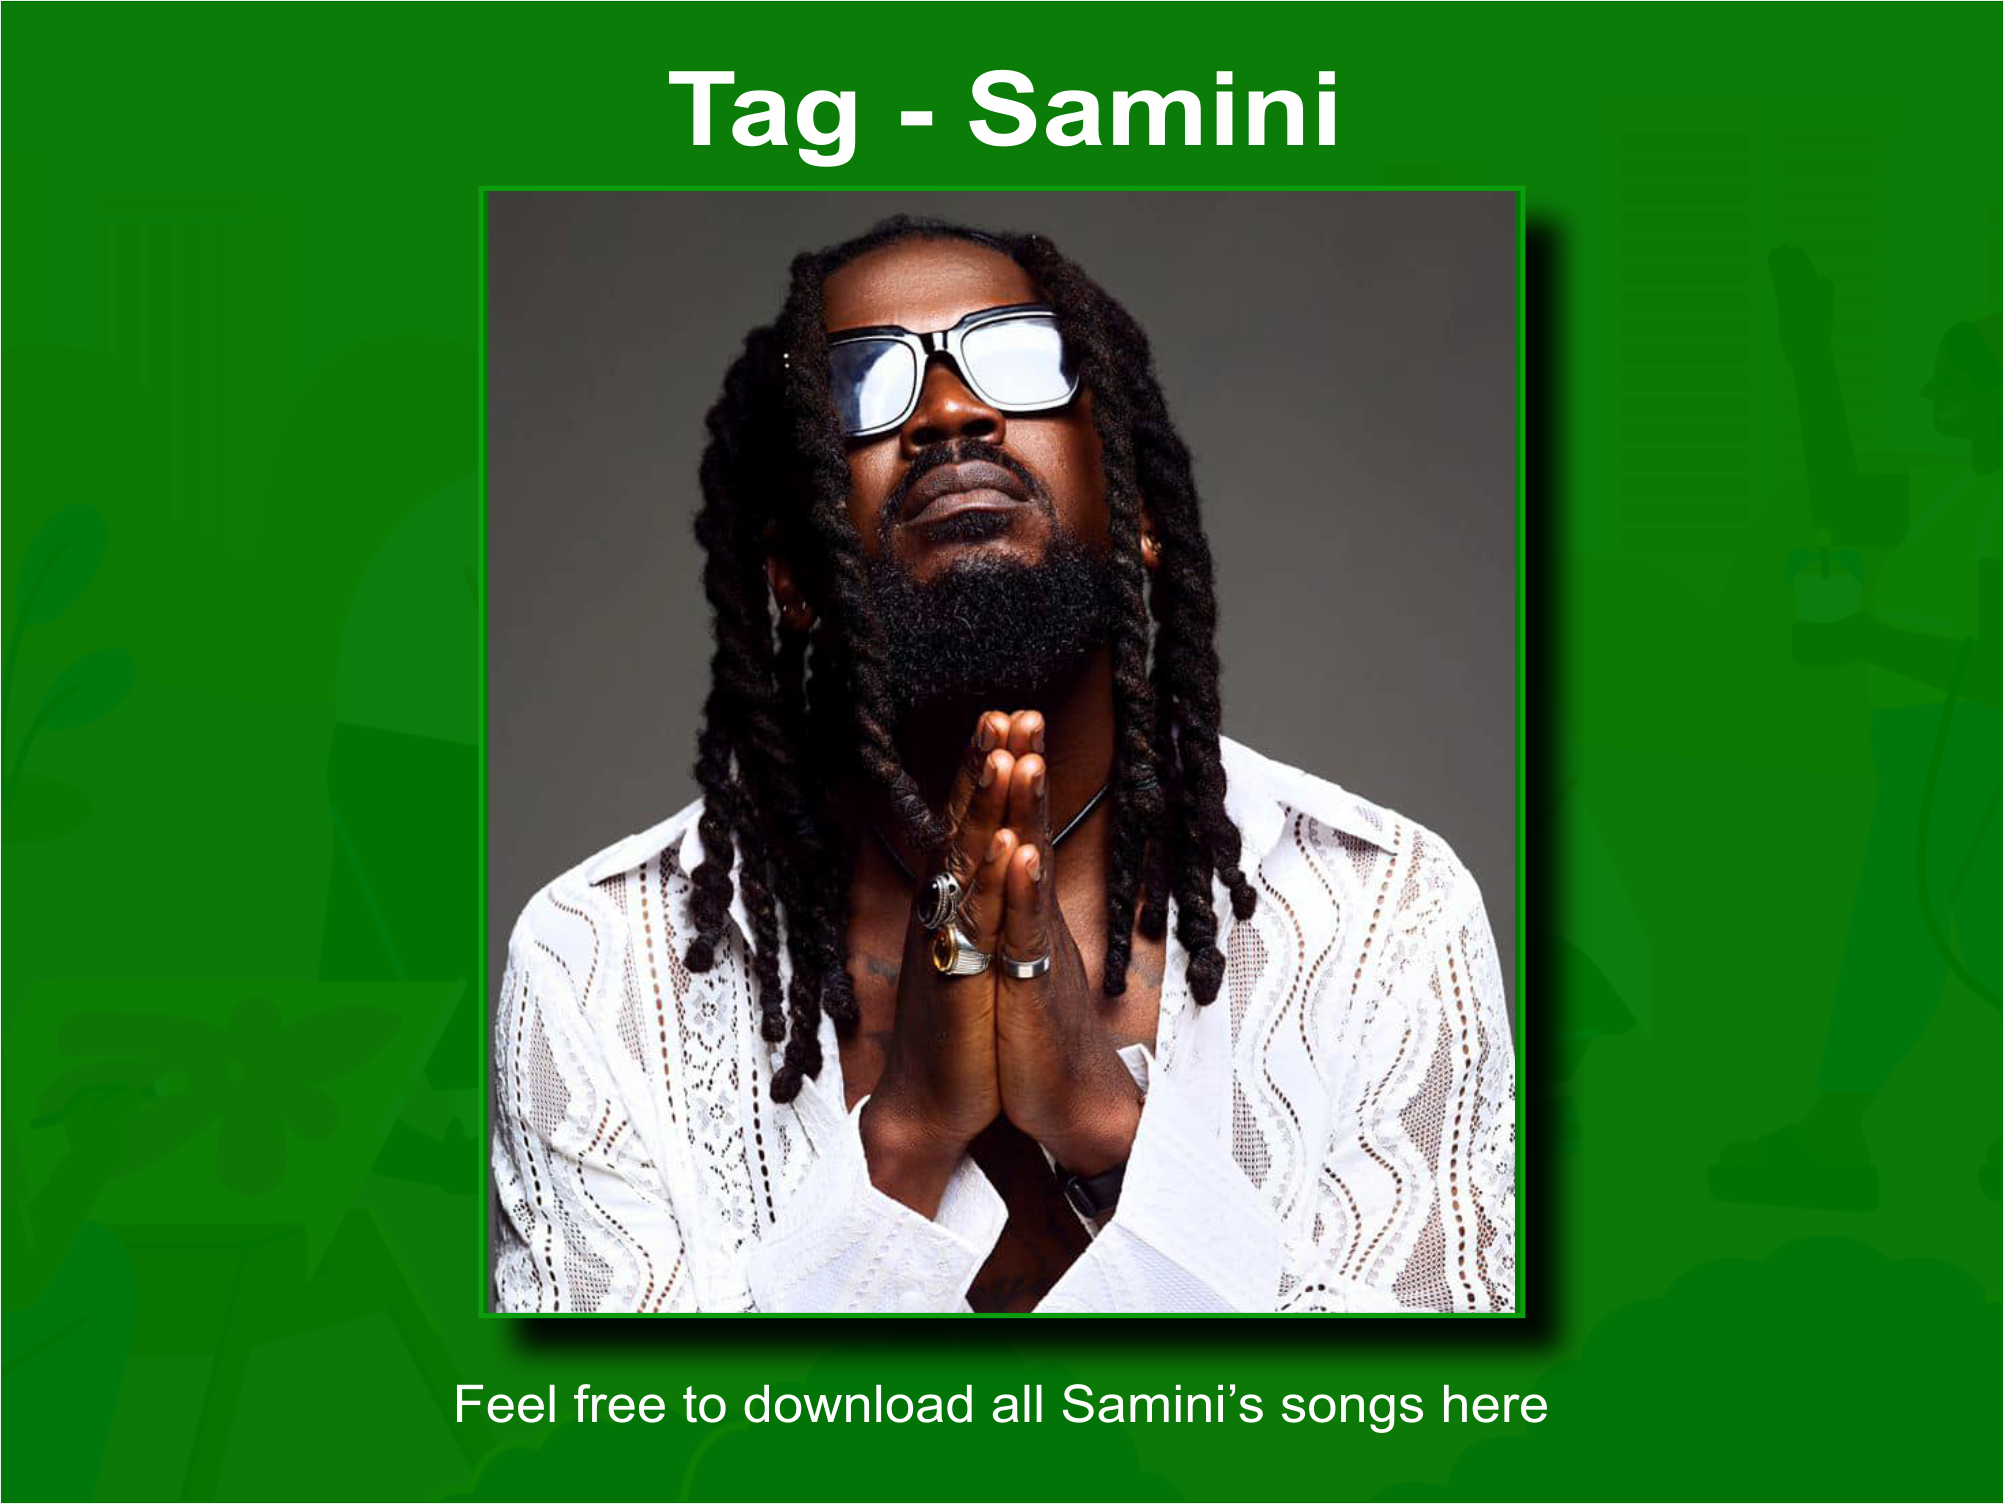 Download all Samini songs here on 3musicgh.com